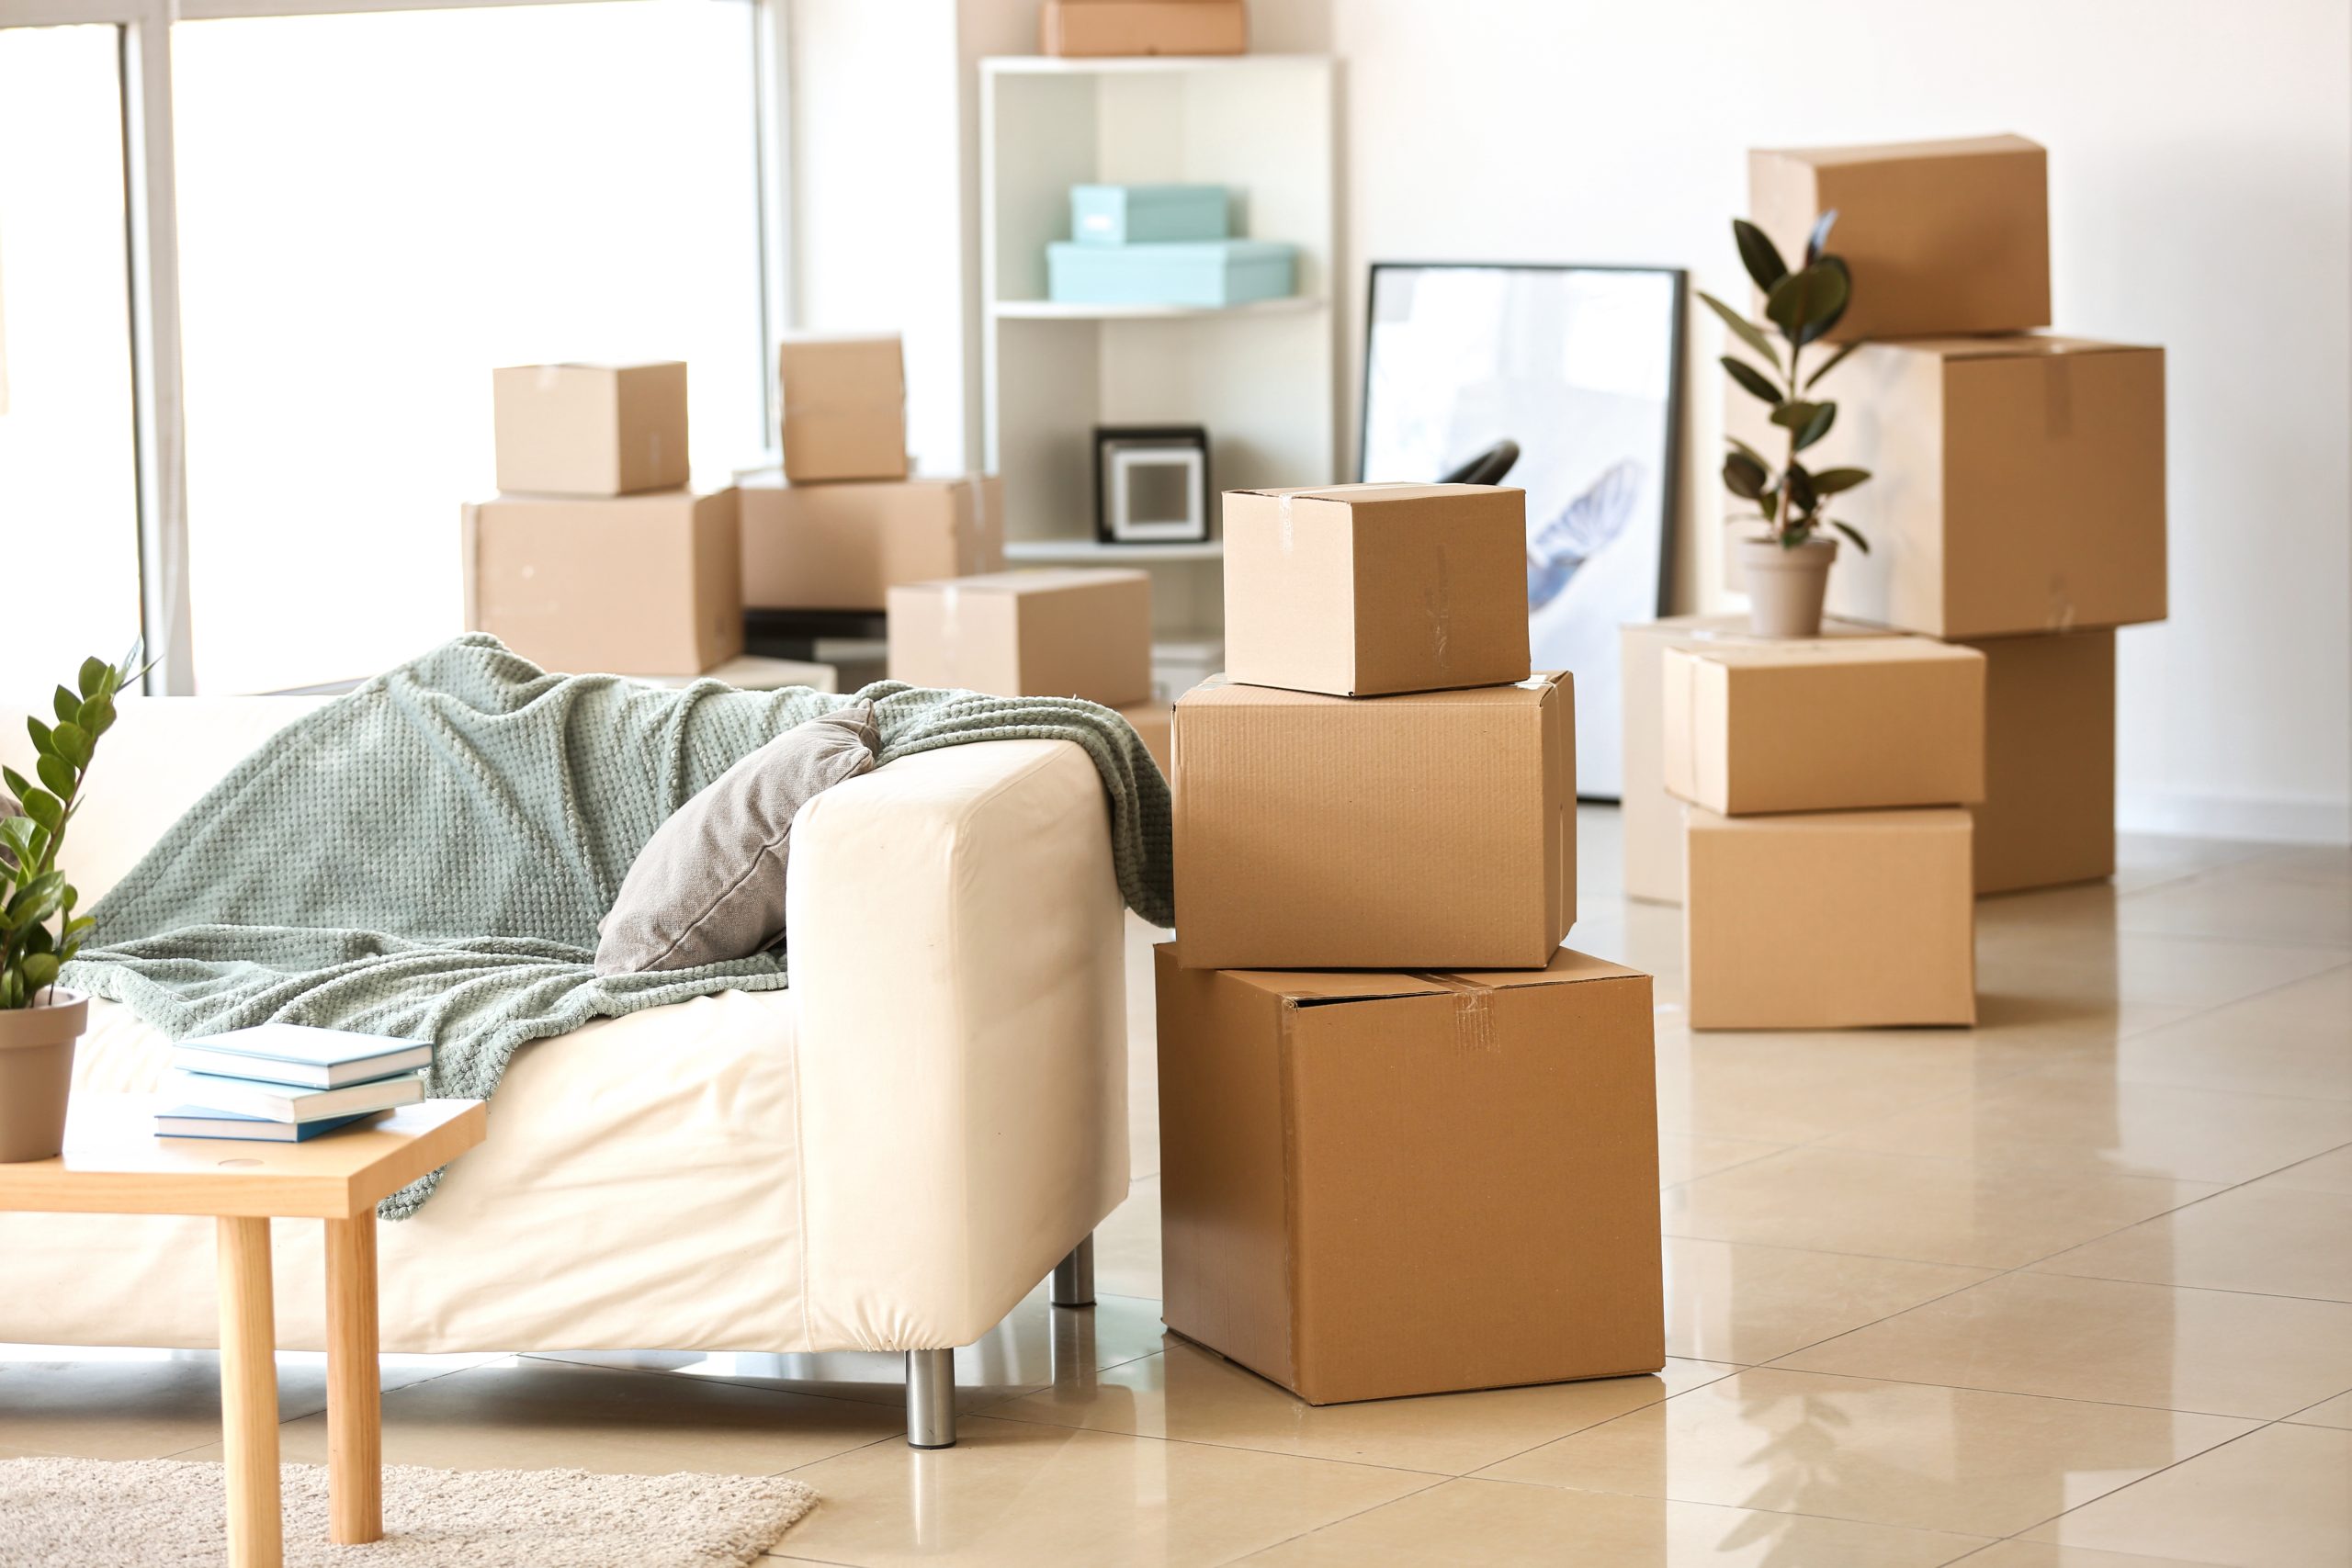 image of packed boxes in a partially furnished living room to illustrate relocation services